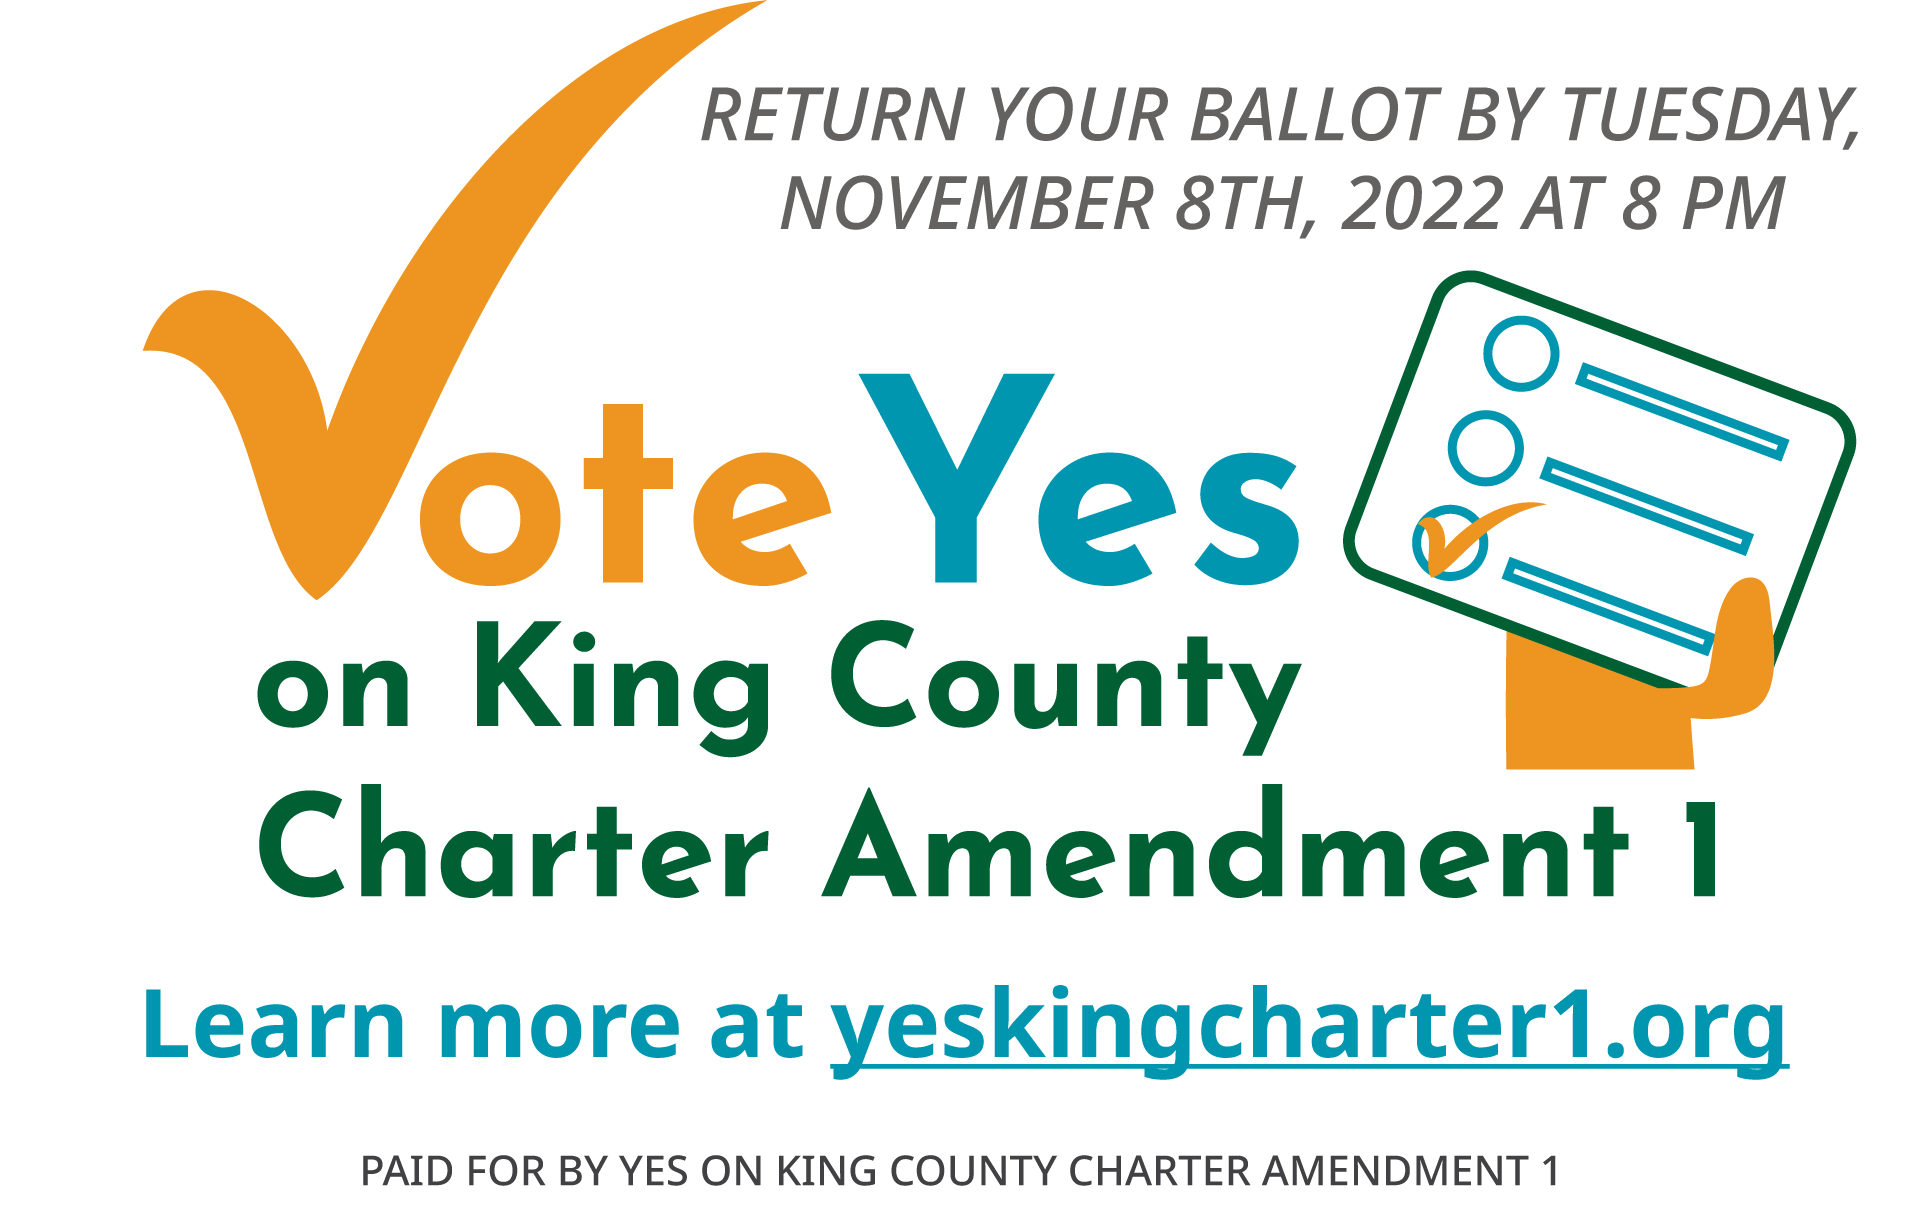 Vote Yes on King County Charter Amendment 1